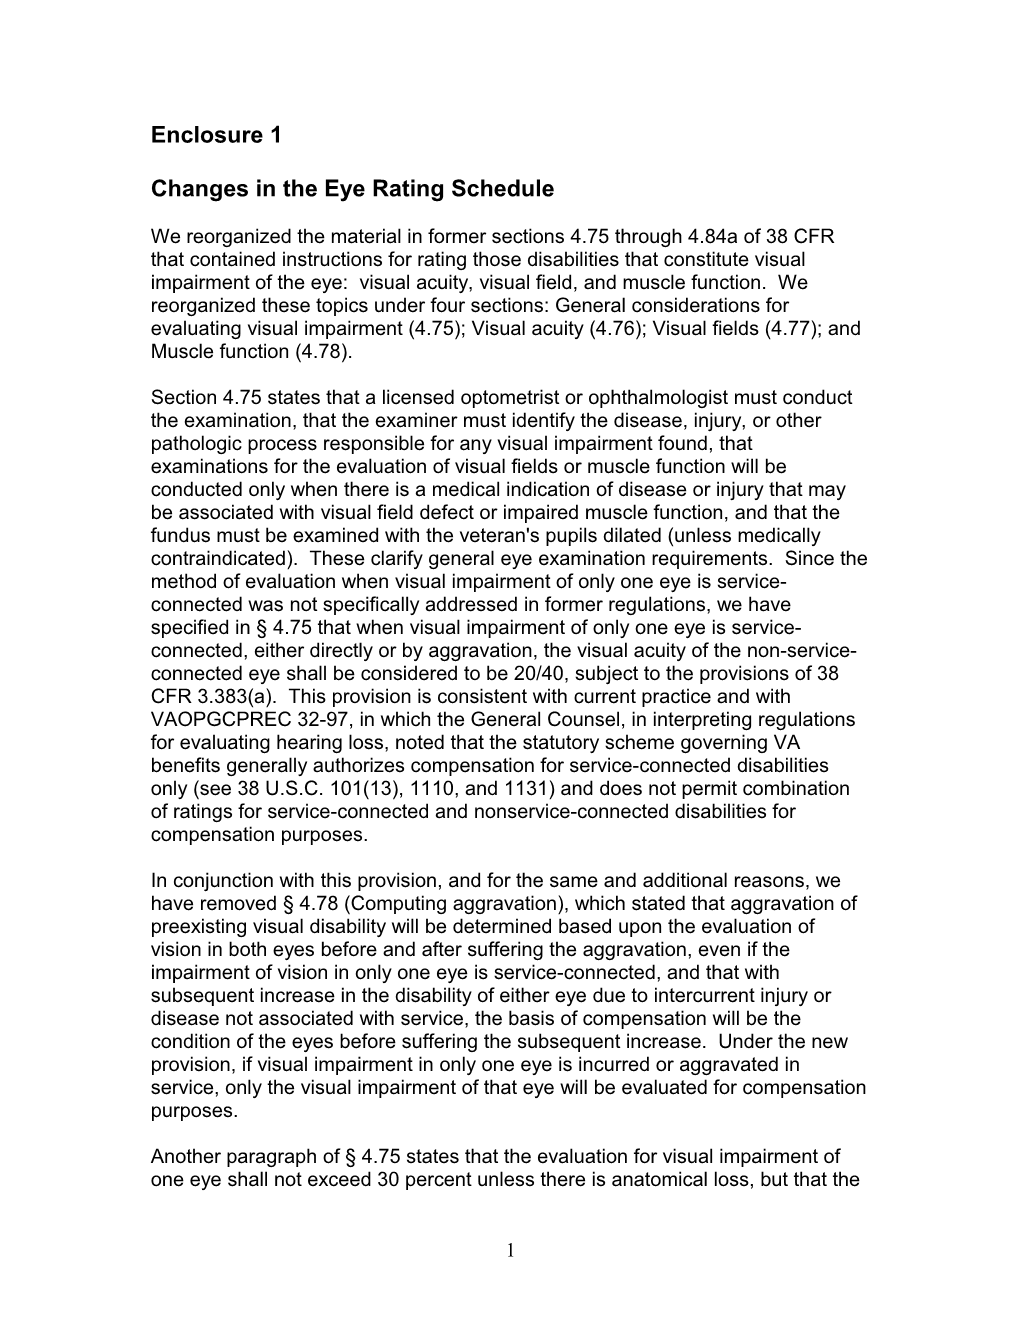 Changes in the Eye Rating Schedule